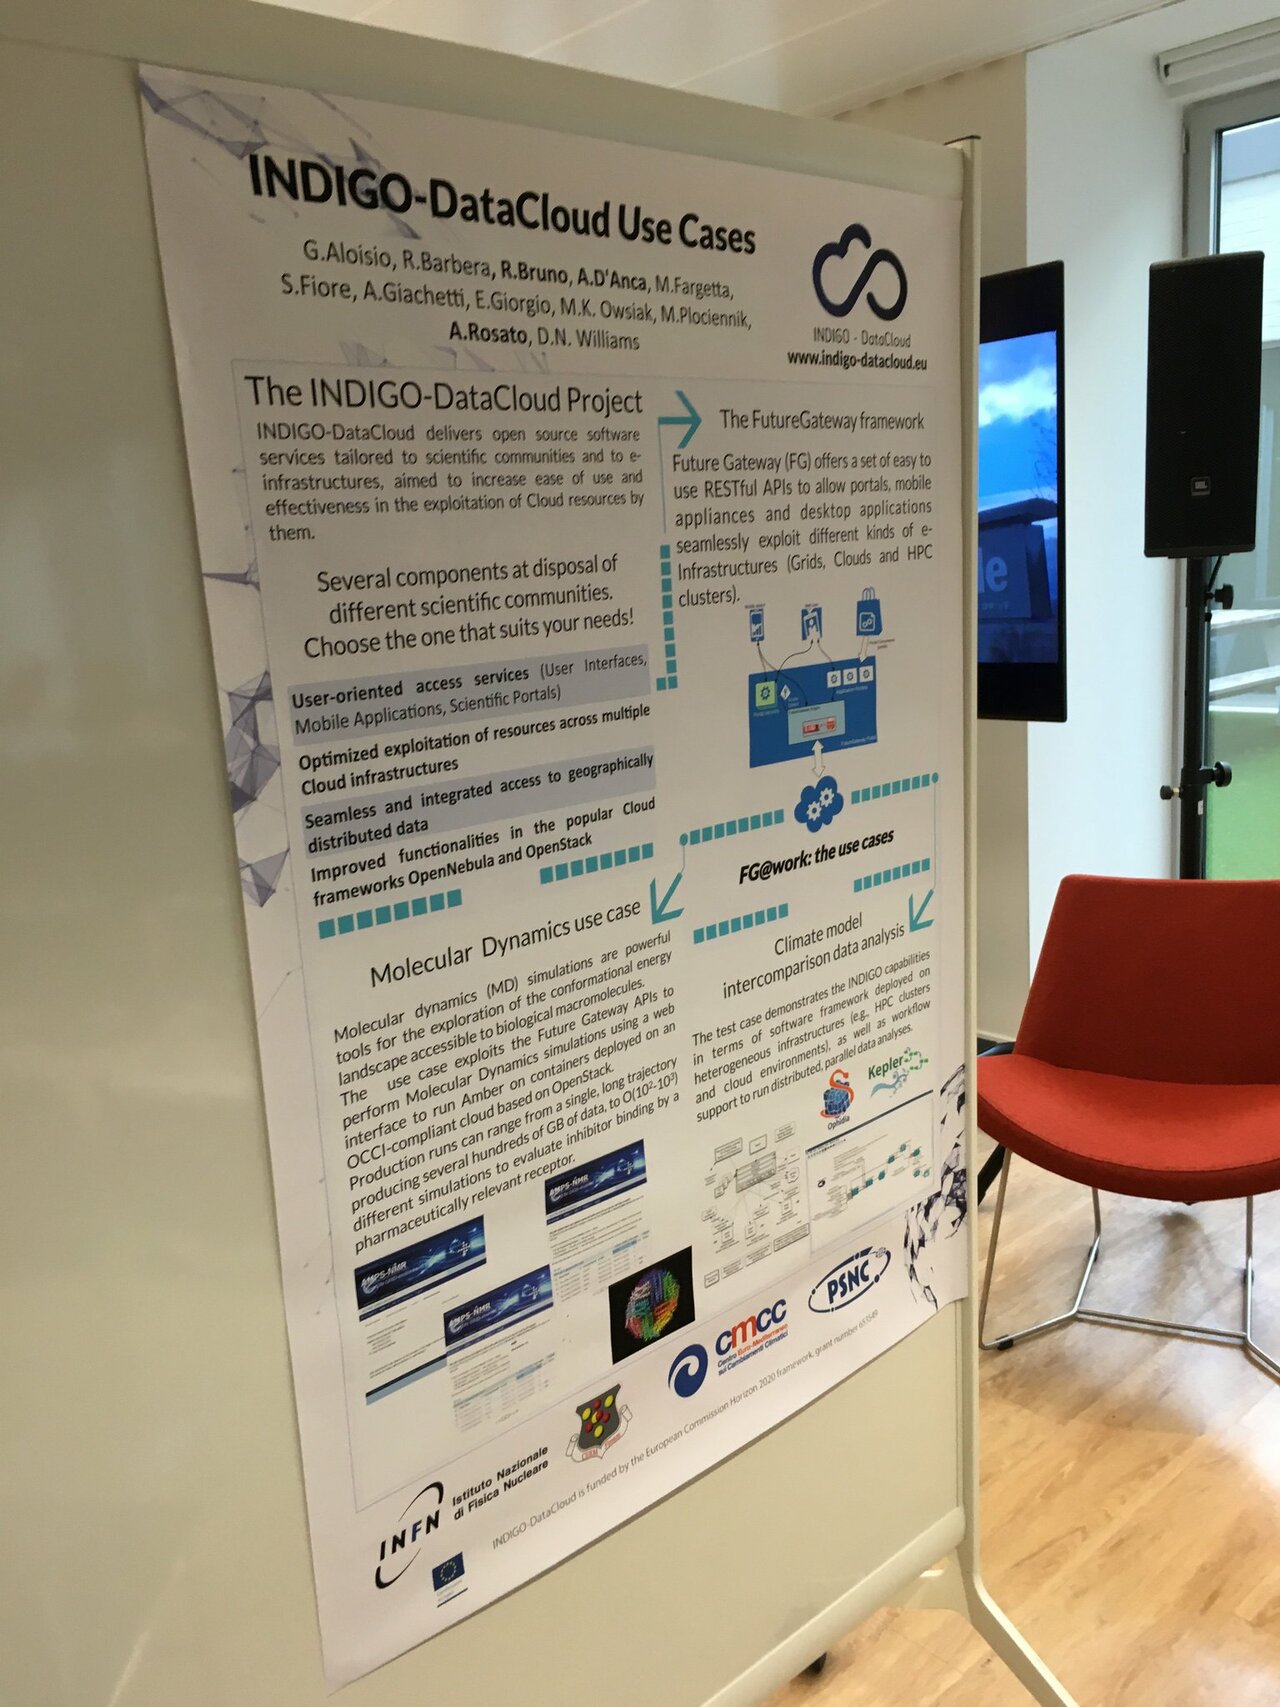 #Cloudscape2016 just started and @indigodatacloud is there. Here's the poster with the use cases to be demonstrated https://t.co/VvKOY1l66m